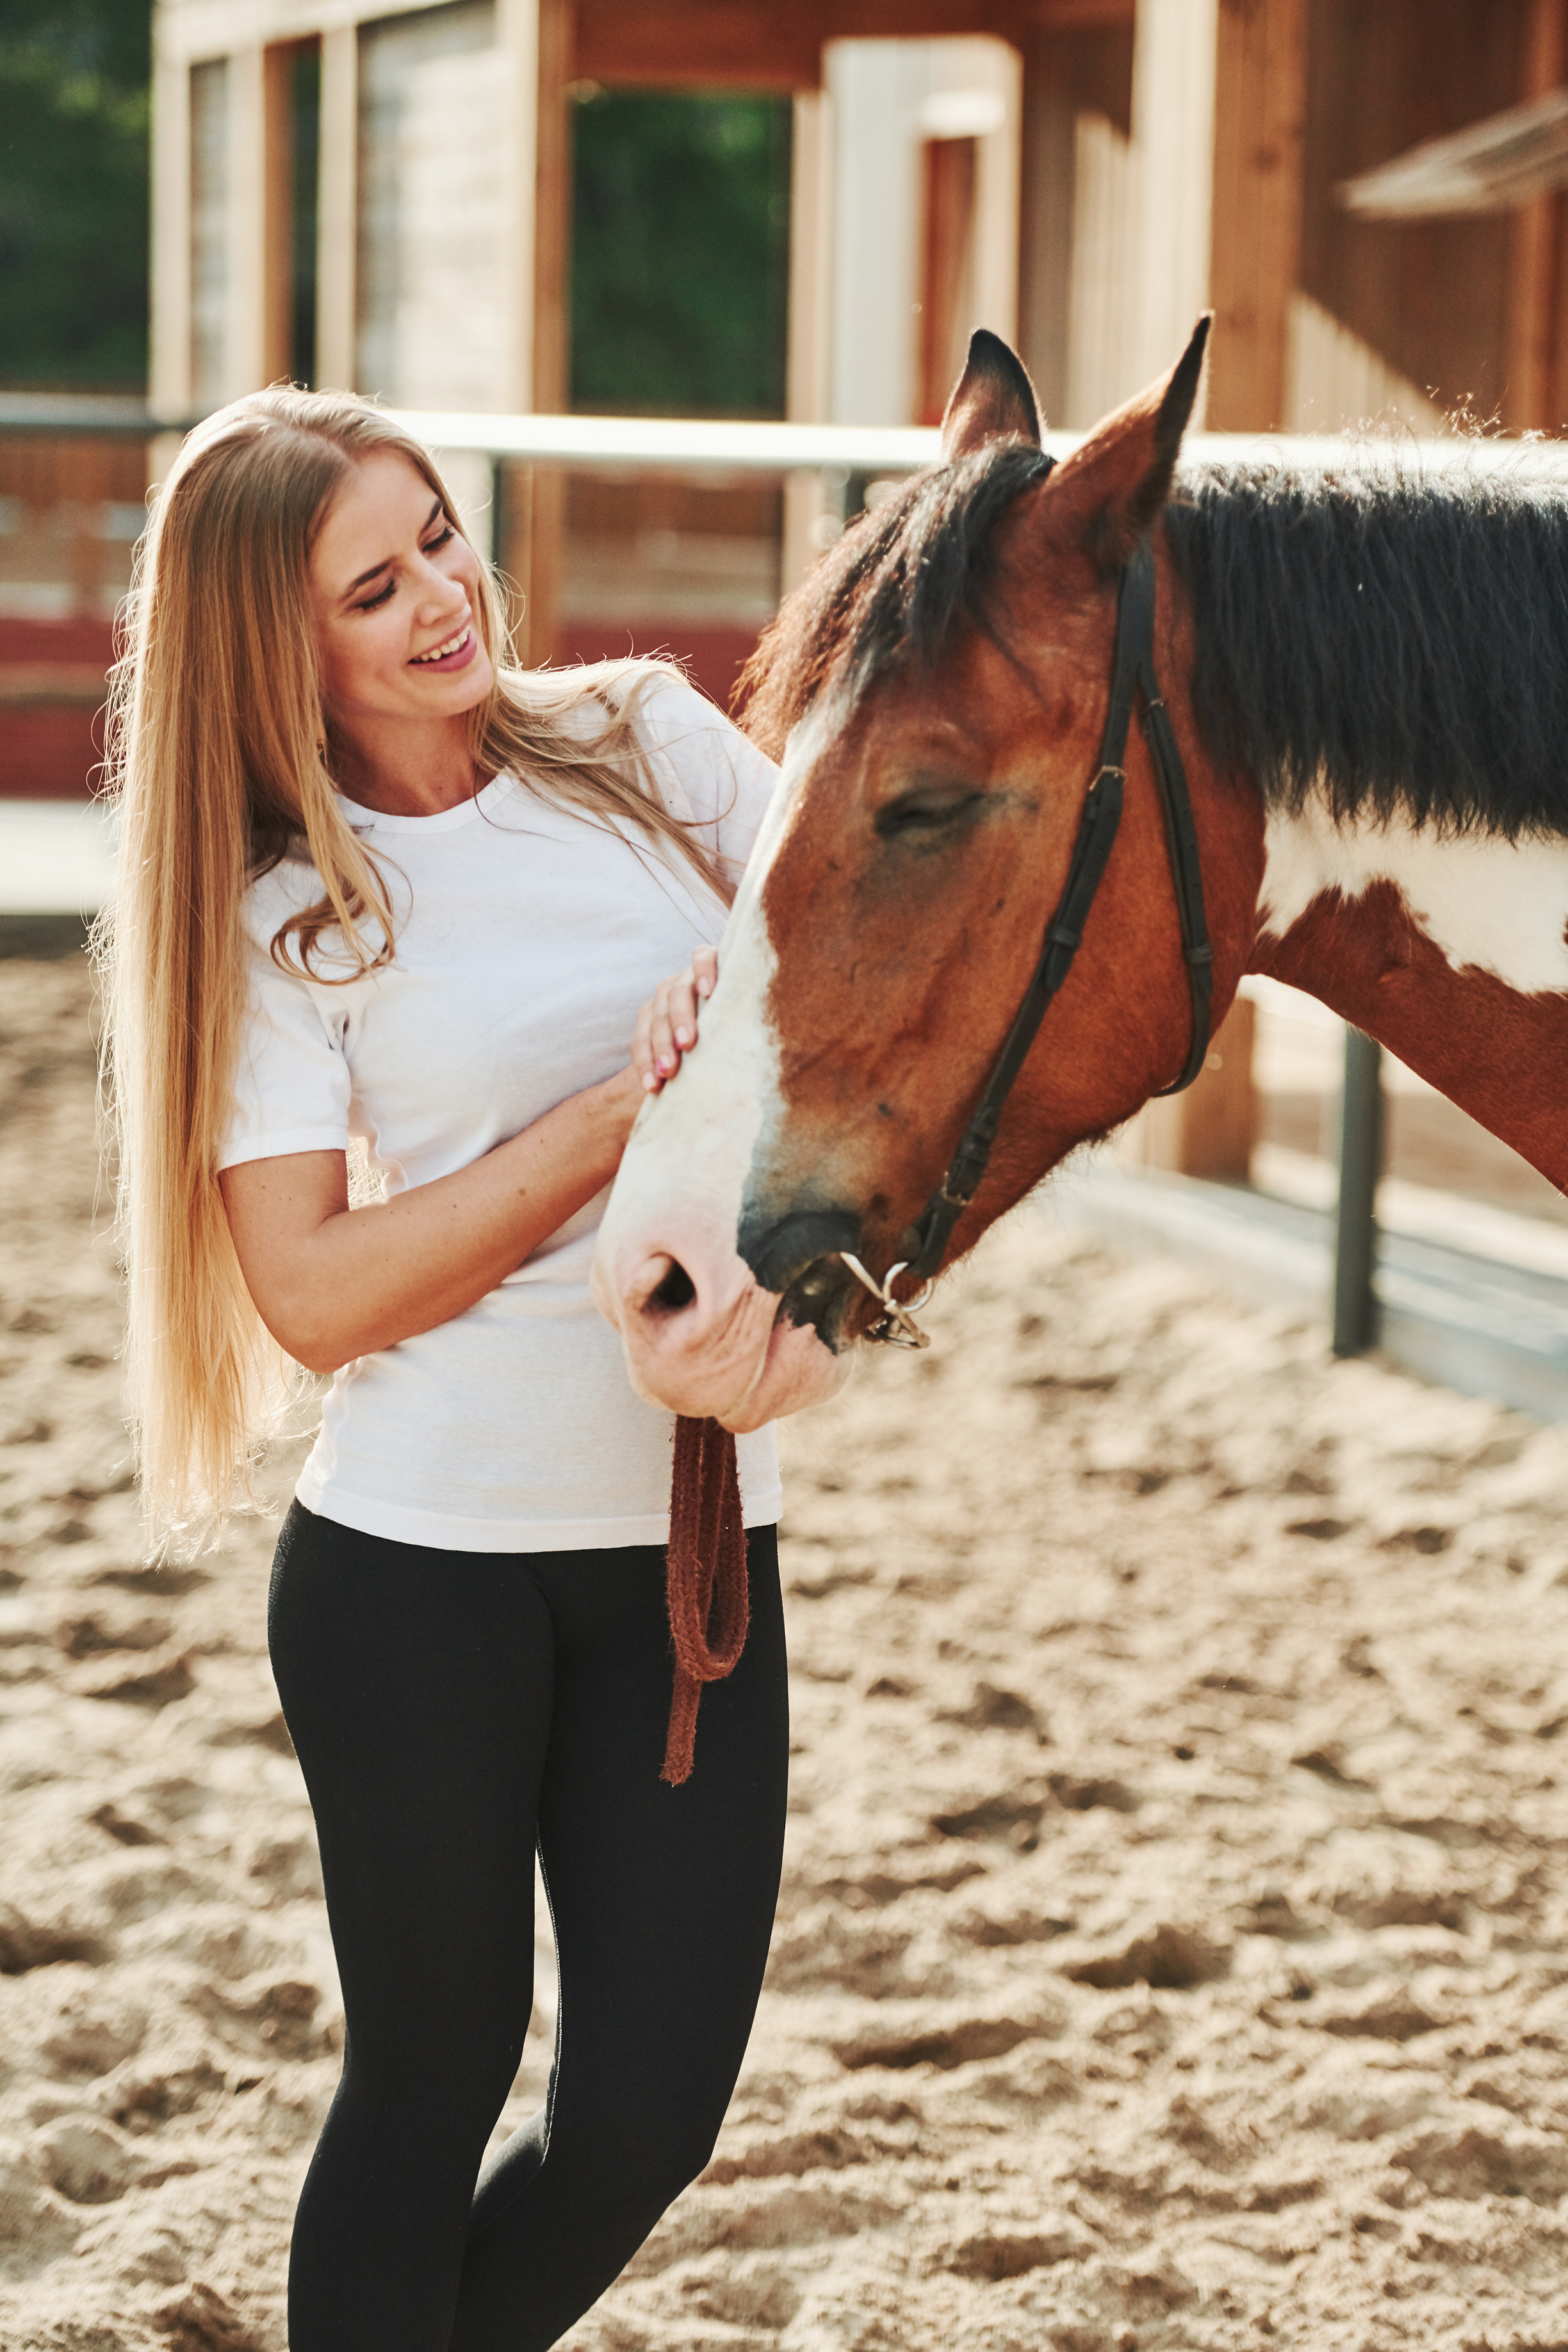 In Black Pants. Happy Woman With Her Horse On The Ranch At Daytime